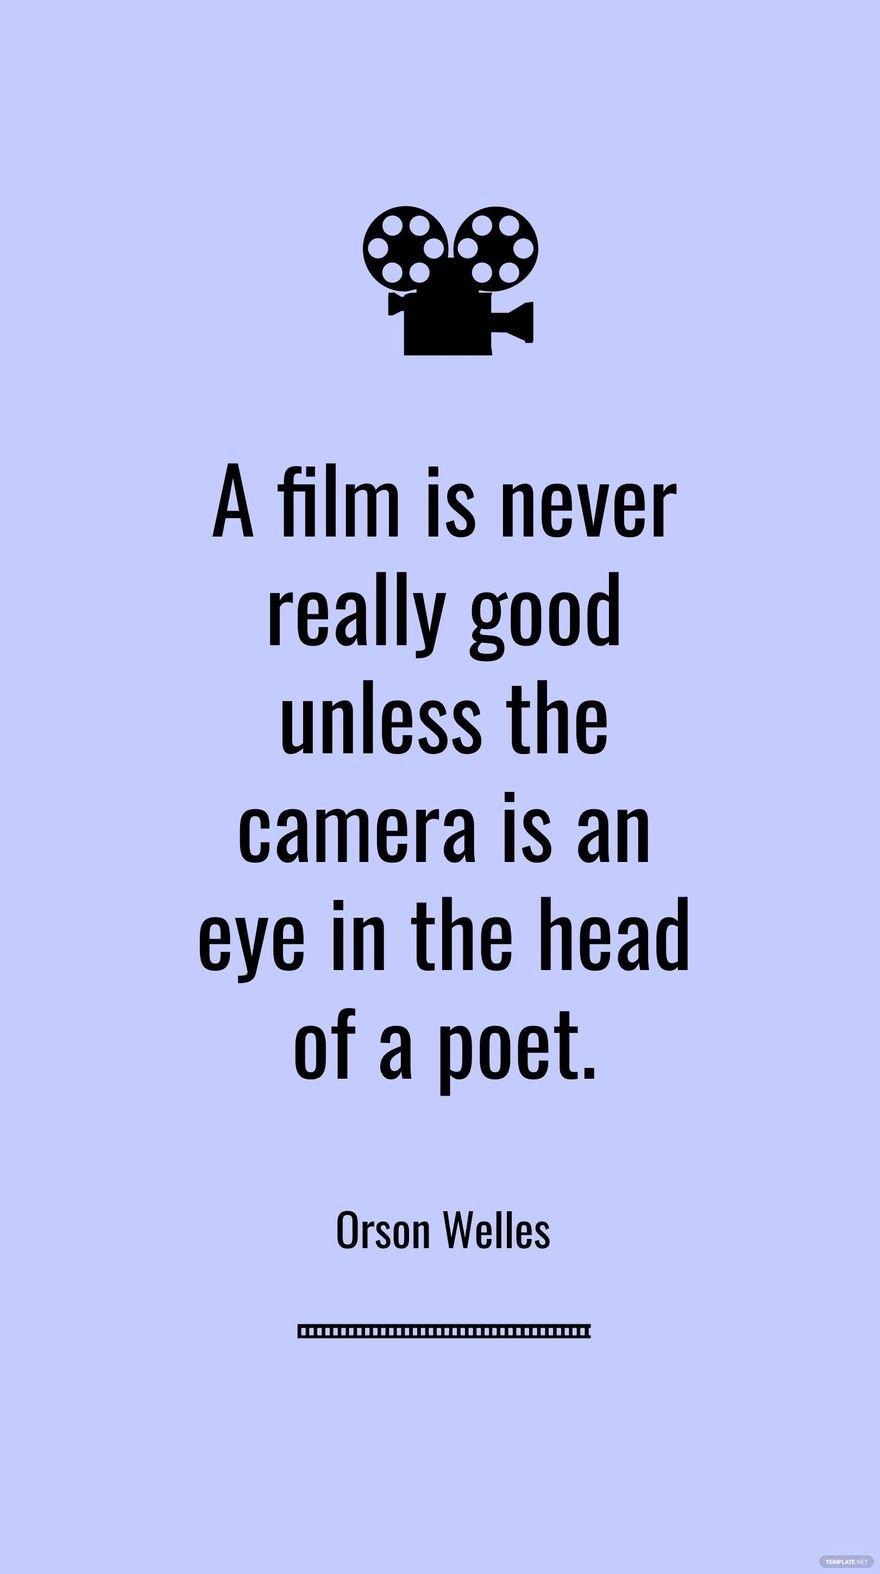 Orson Welles - A film is never really good unless the camera is an eye in the head of a poet.